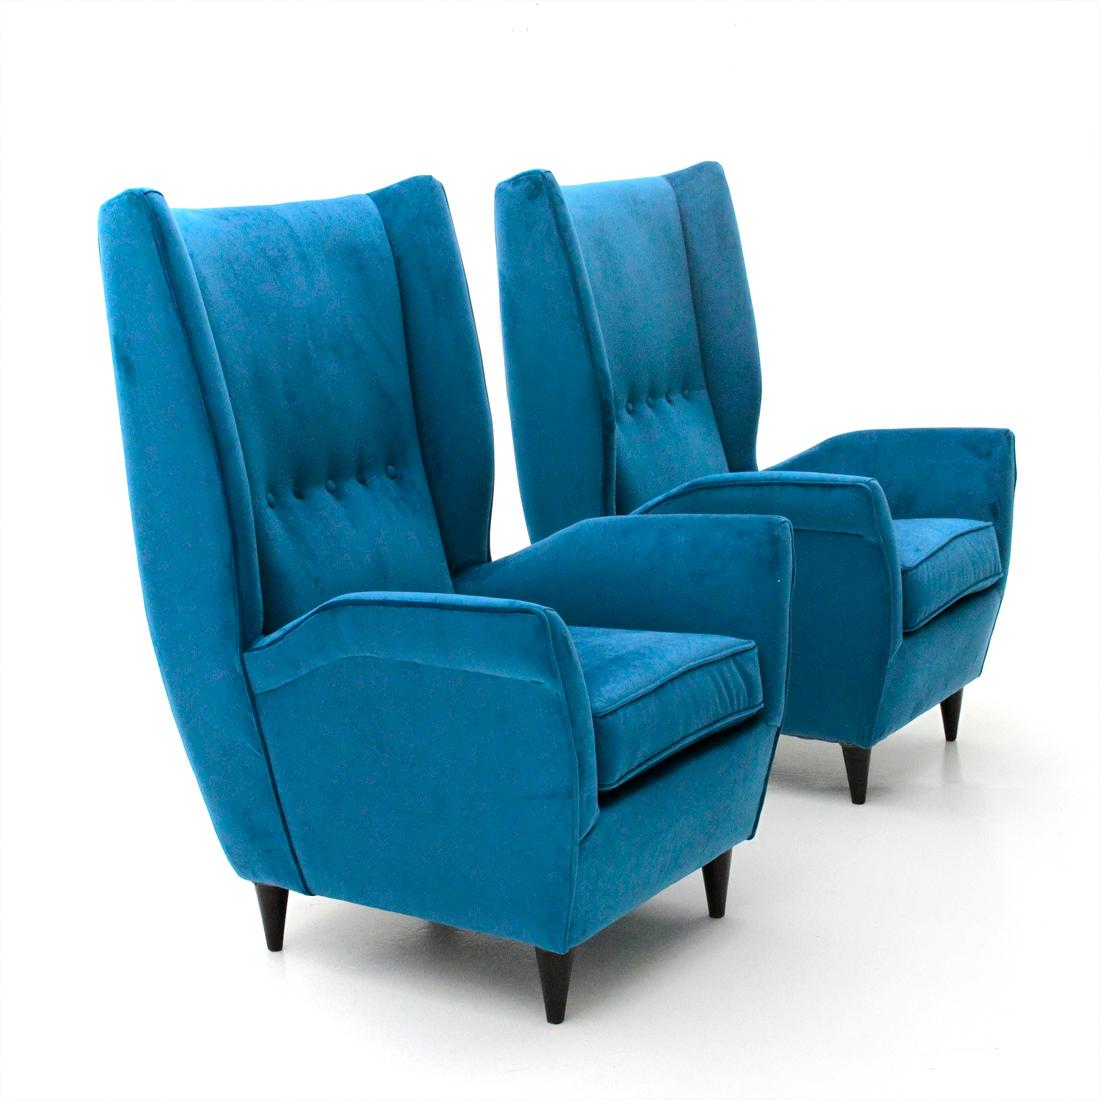 Pair of Italian-made armchairs produced in the 1950s.
Wooden structure padded and lined with new blue velvet fabric.
Seat with cushion.
High back with stitched buttons.
Feet in turned conical wood.
Good general conditions, some signs due to